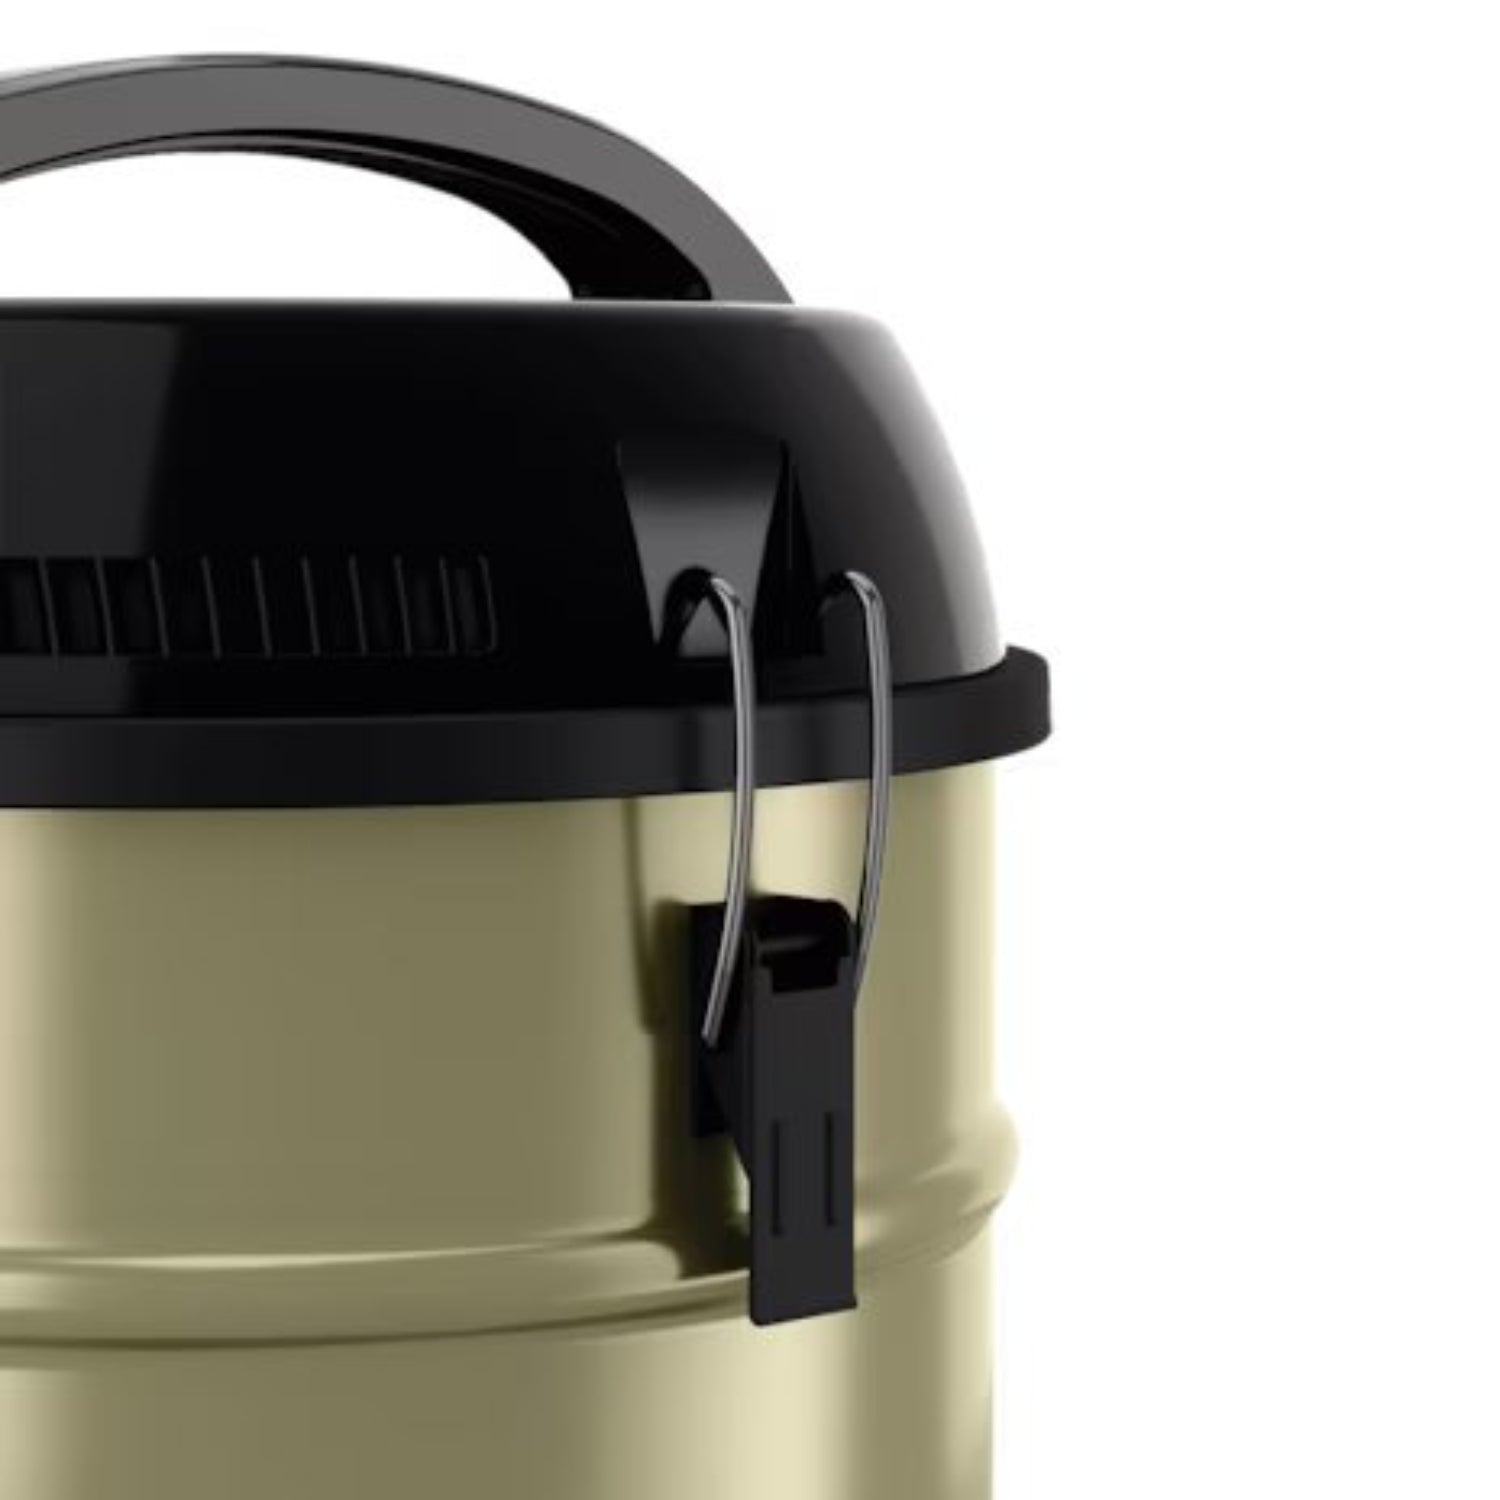 Electrolux Vacuum Cleaner with 23L Dust Bin Capacity